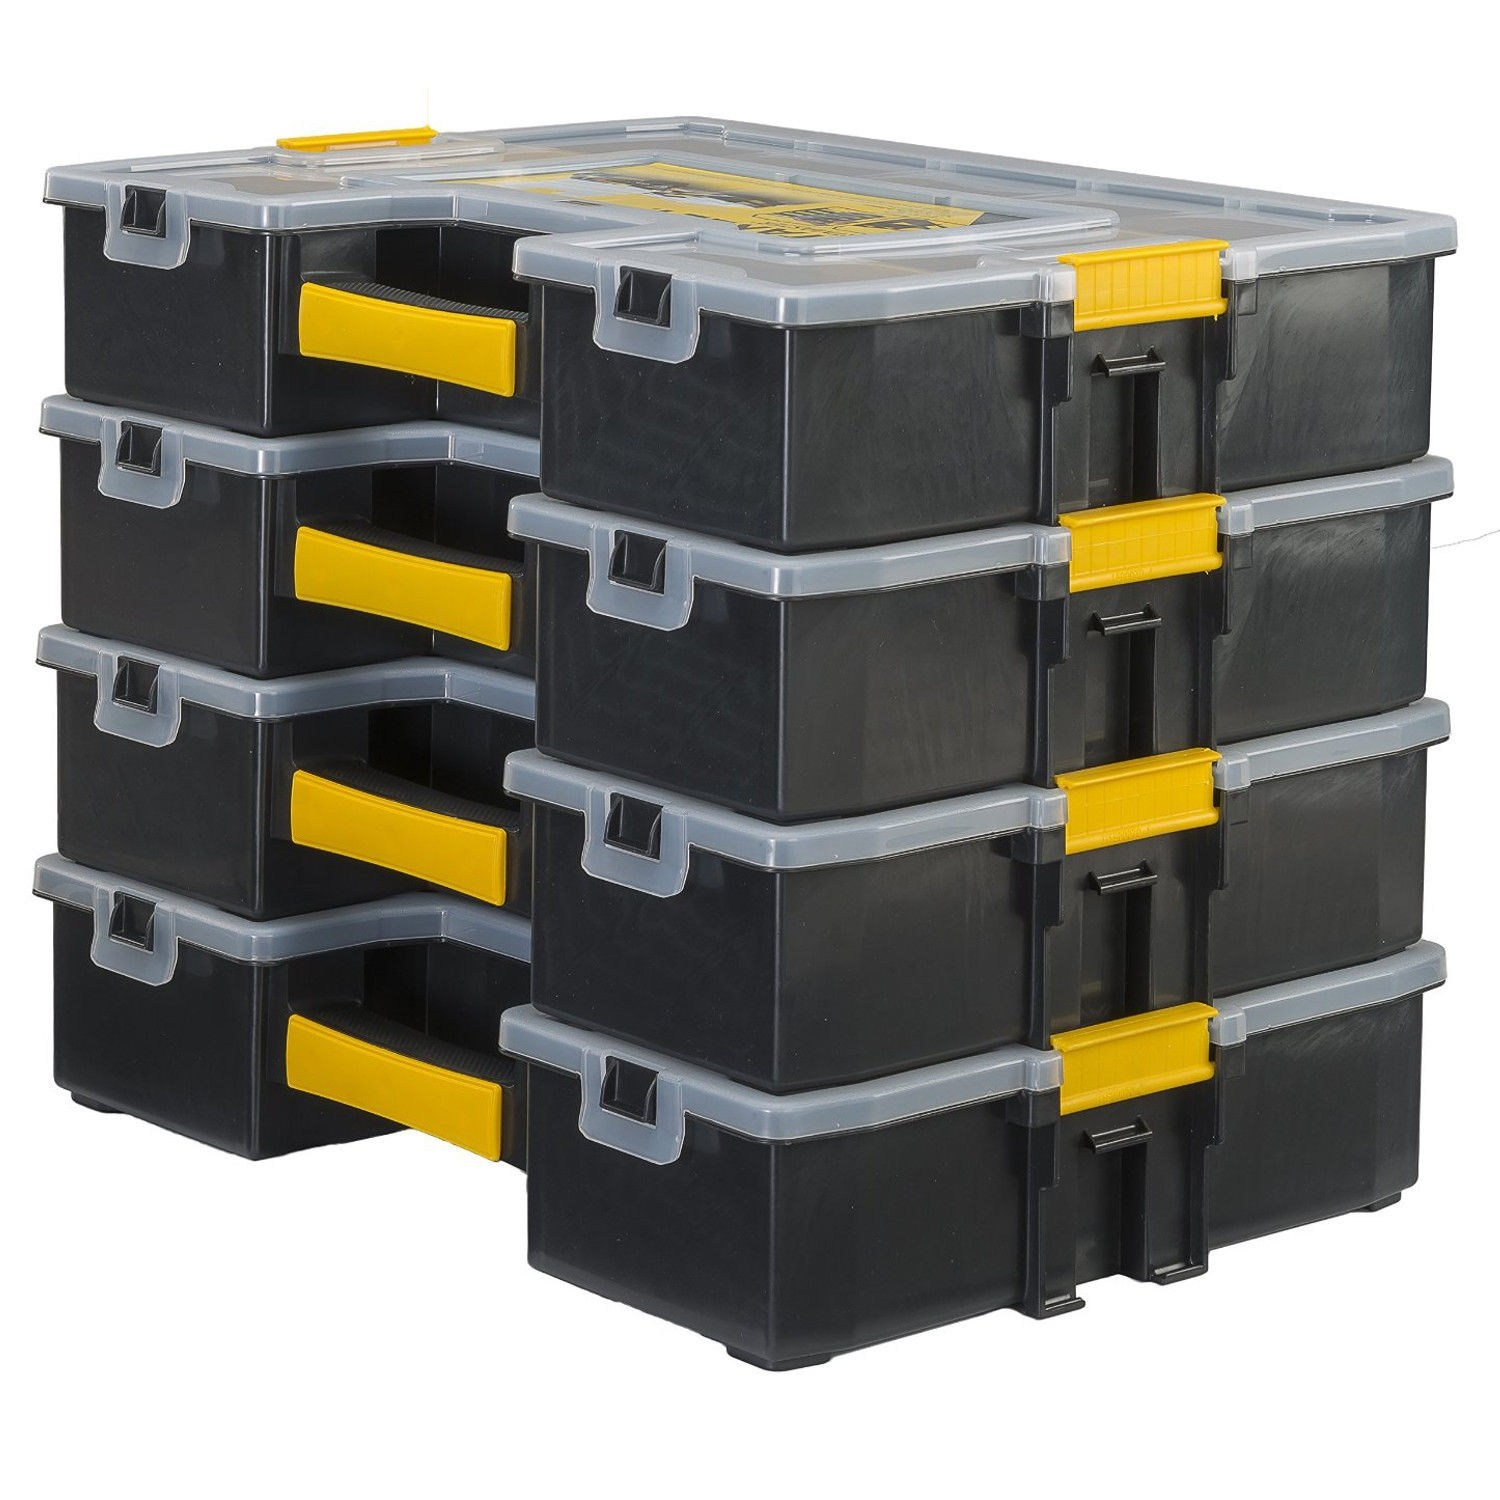 Stanley Storage Containers Listitdallas intended for size 1500 X 1500